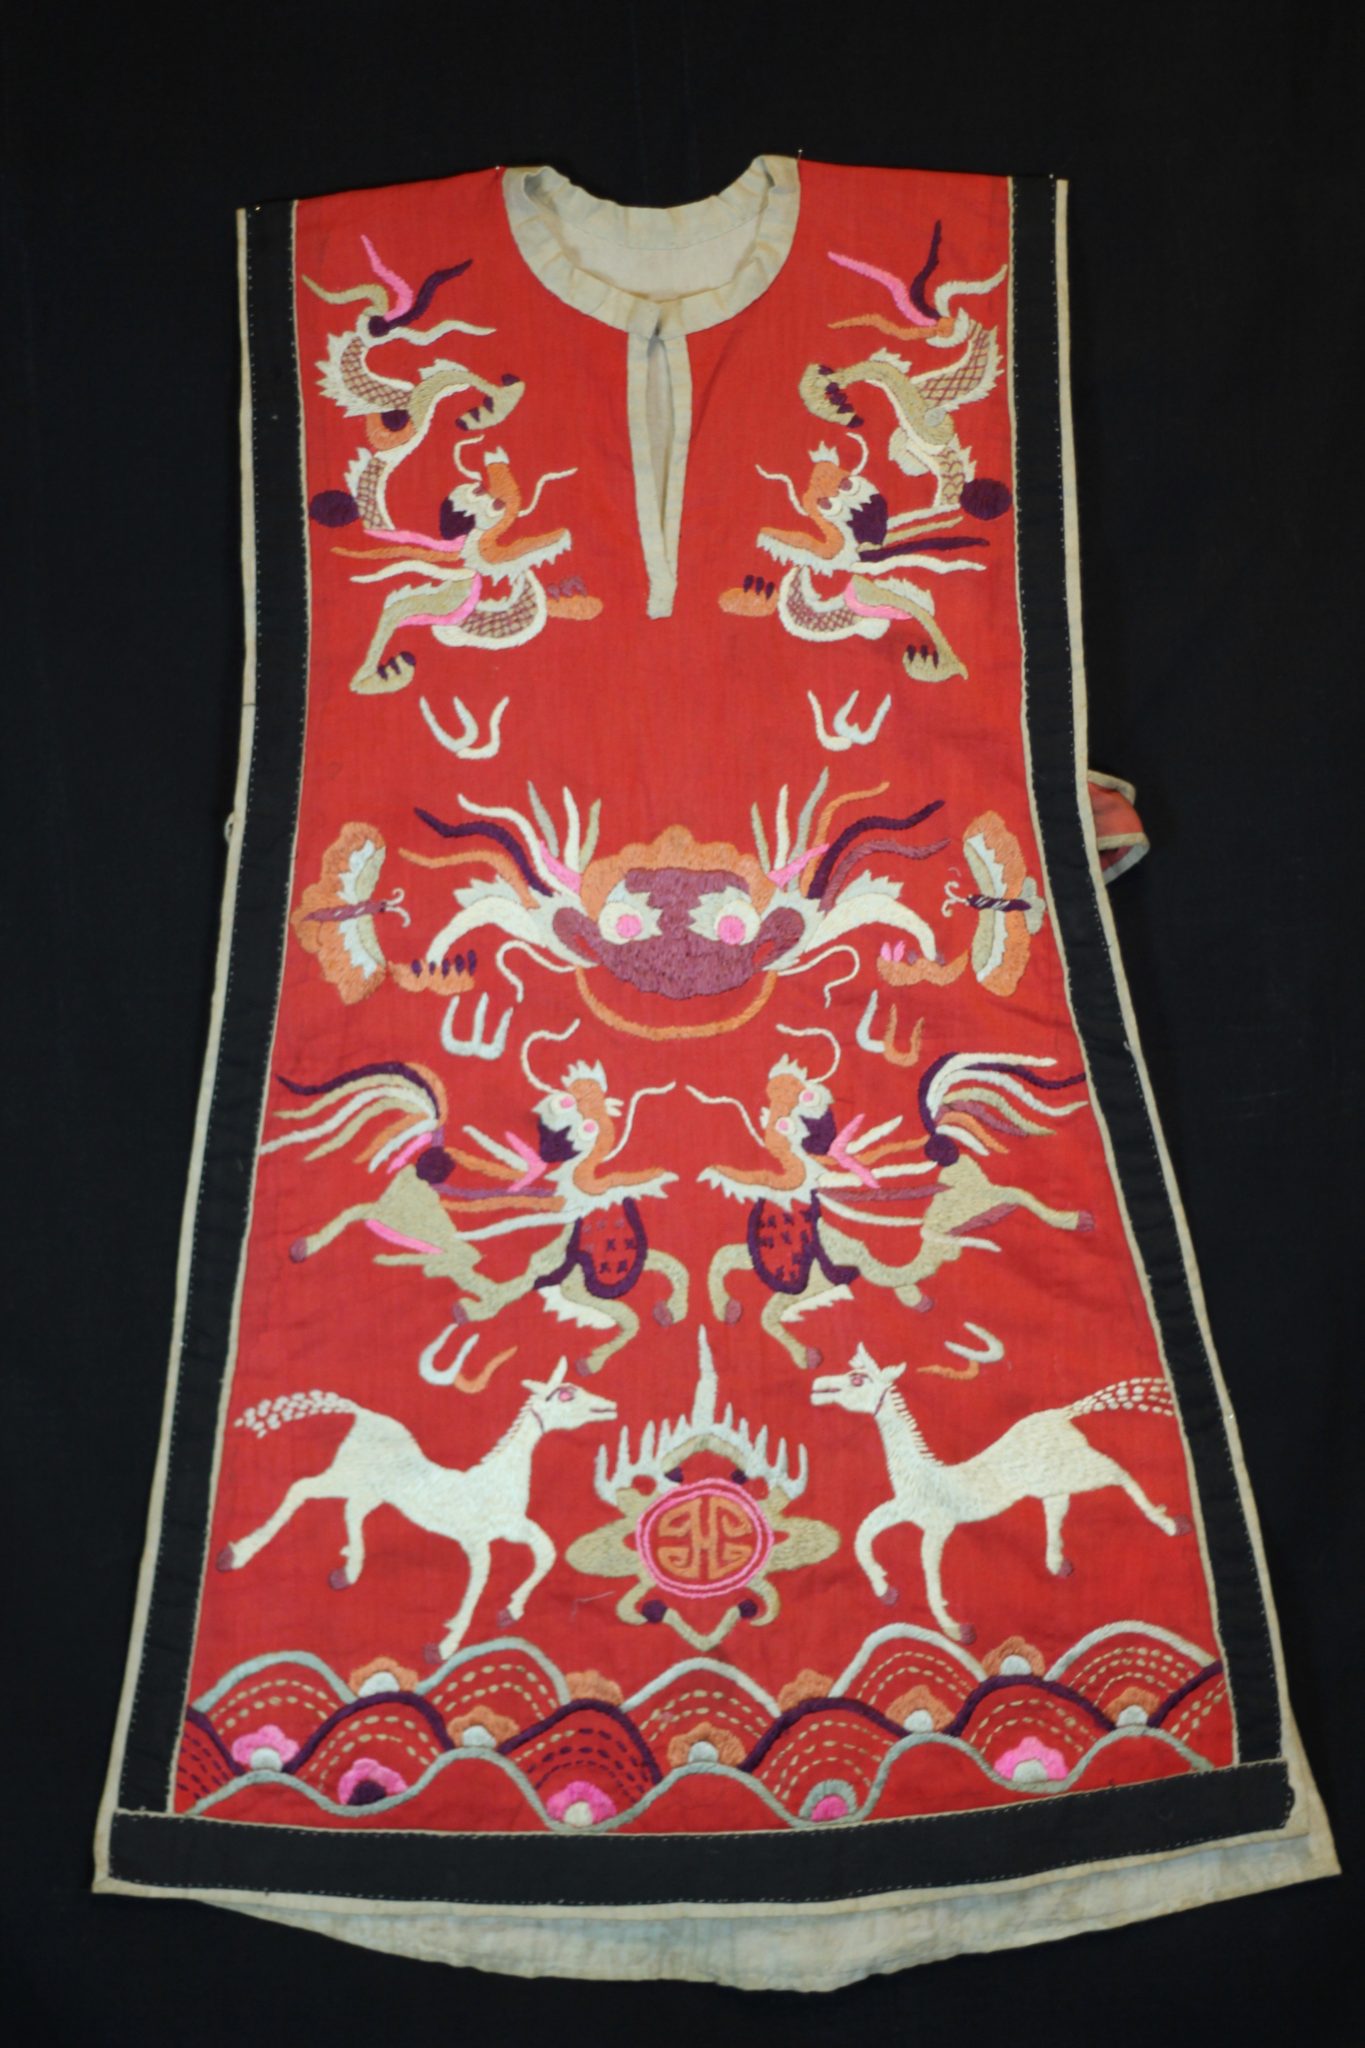 Dragon Tunic Ritual Costume, Vietnam, Tight Trouser Yao people, Mid 20th c, Cotton, silk embroidery. Worn only by high level shaman. The motif typically includes all the deities of heaven to clothe the shaman in the protection of the universe. Not a vain adornment, it is a reminder of man's place in the hierarchical order. Originally a female costume. Long ago shamans were women and men the providers. Not being encumbered by childbirth and rearing, men replaces women as shamans but retained this part of the sacred costume. 34” x 24”, $2800